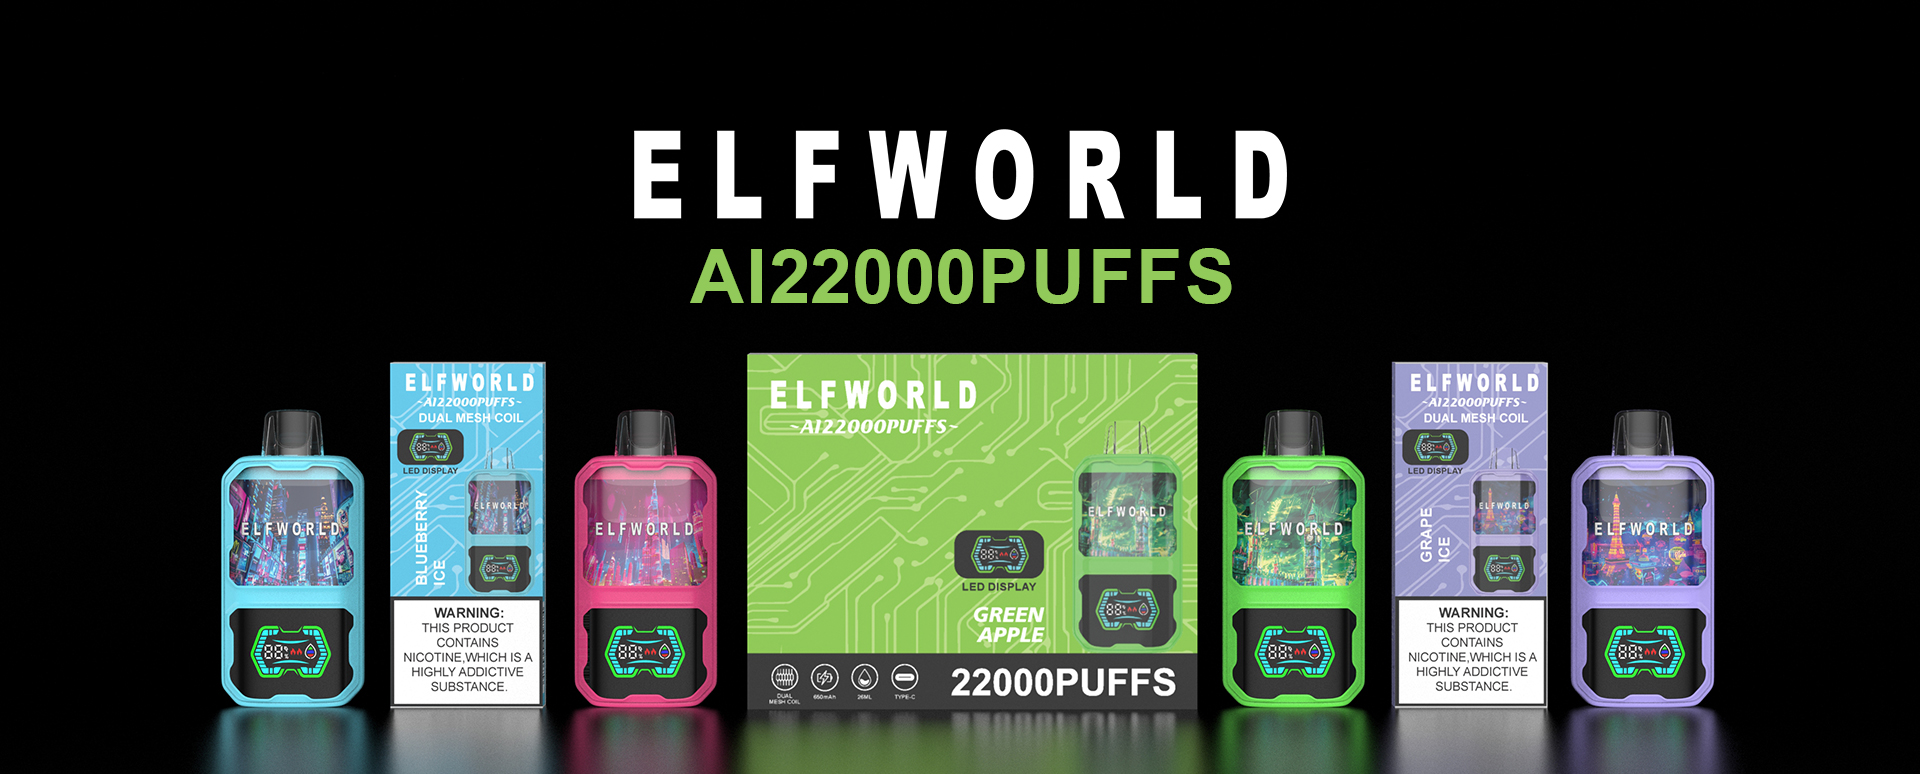 ELFWORLD AI22000 RECHARGEABLE DISPOSABLE VAPE POD DEVICE WITH BATTERY AND LIQUID DISPLAY WHOLESALE (22000 PUFFS)